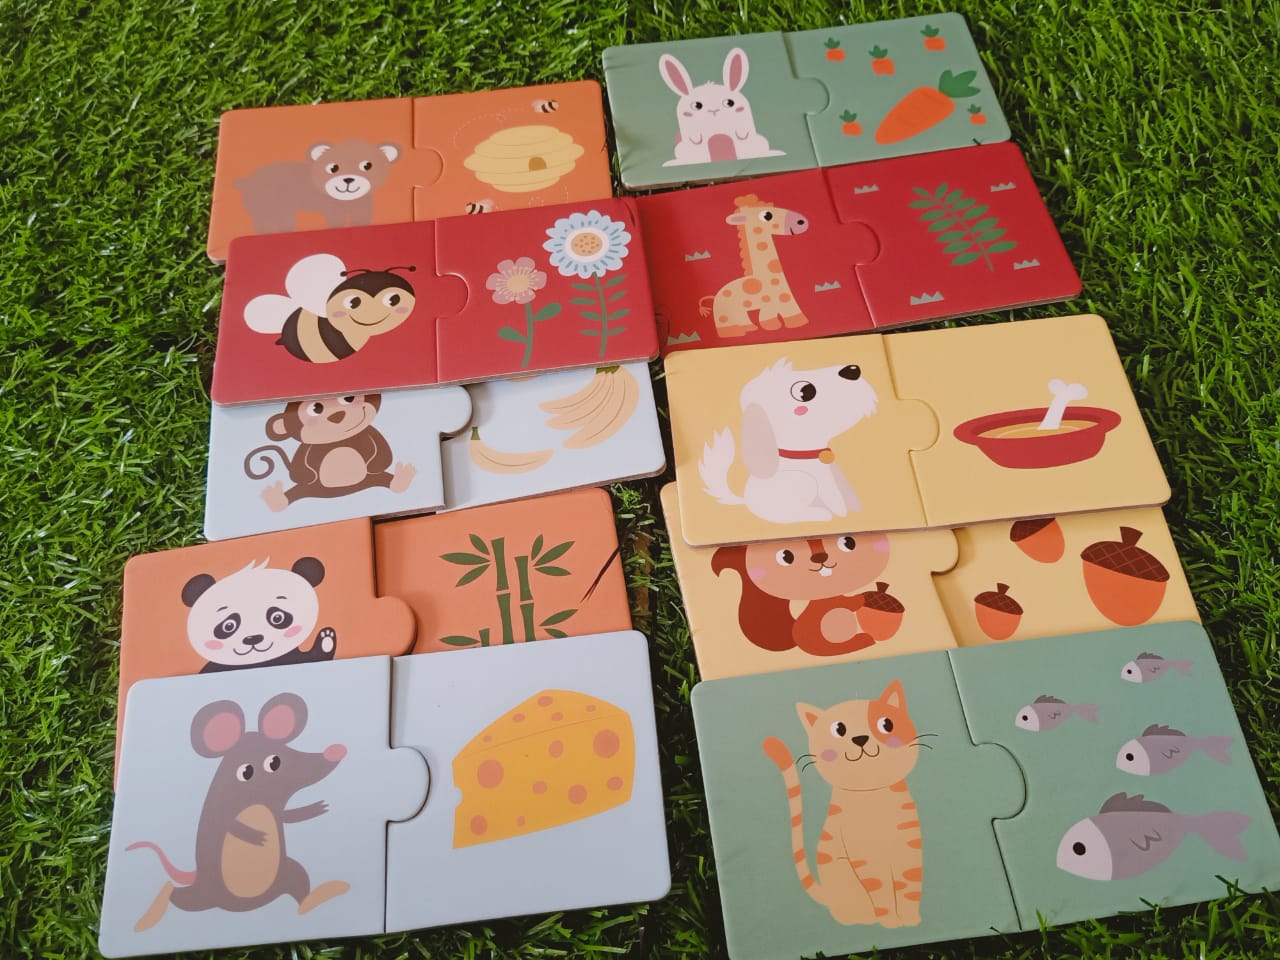 My First Learning Puzzle - Animal and Food, Multi Color for Kids-SHTM1072